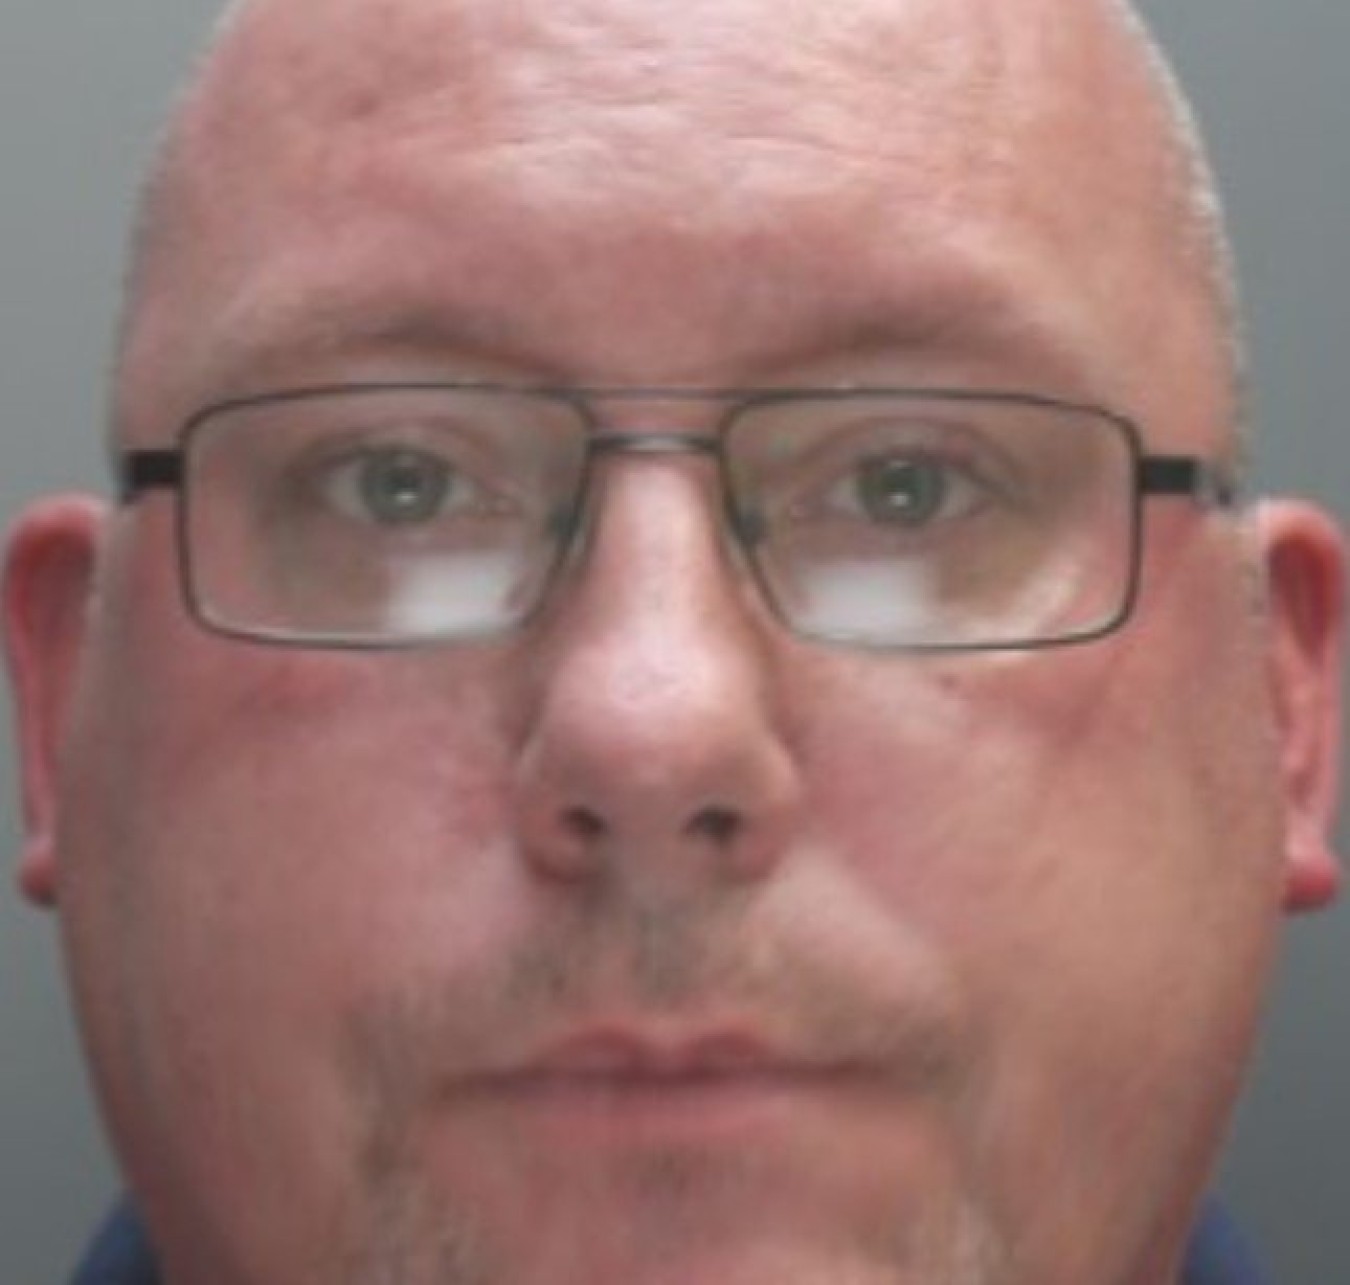 Man from Formby near Southport jailed for 21 years for sex offences